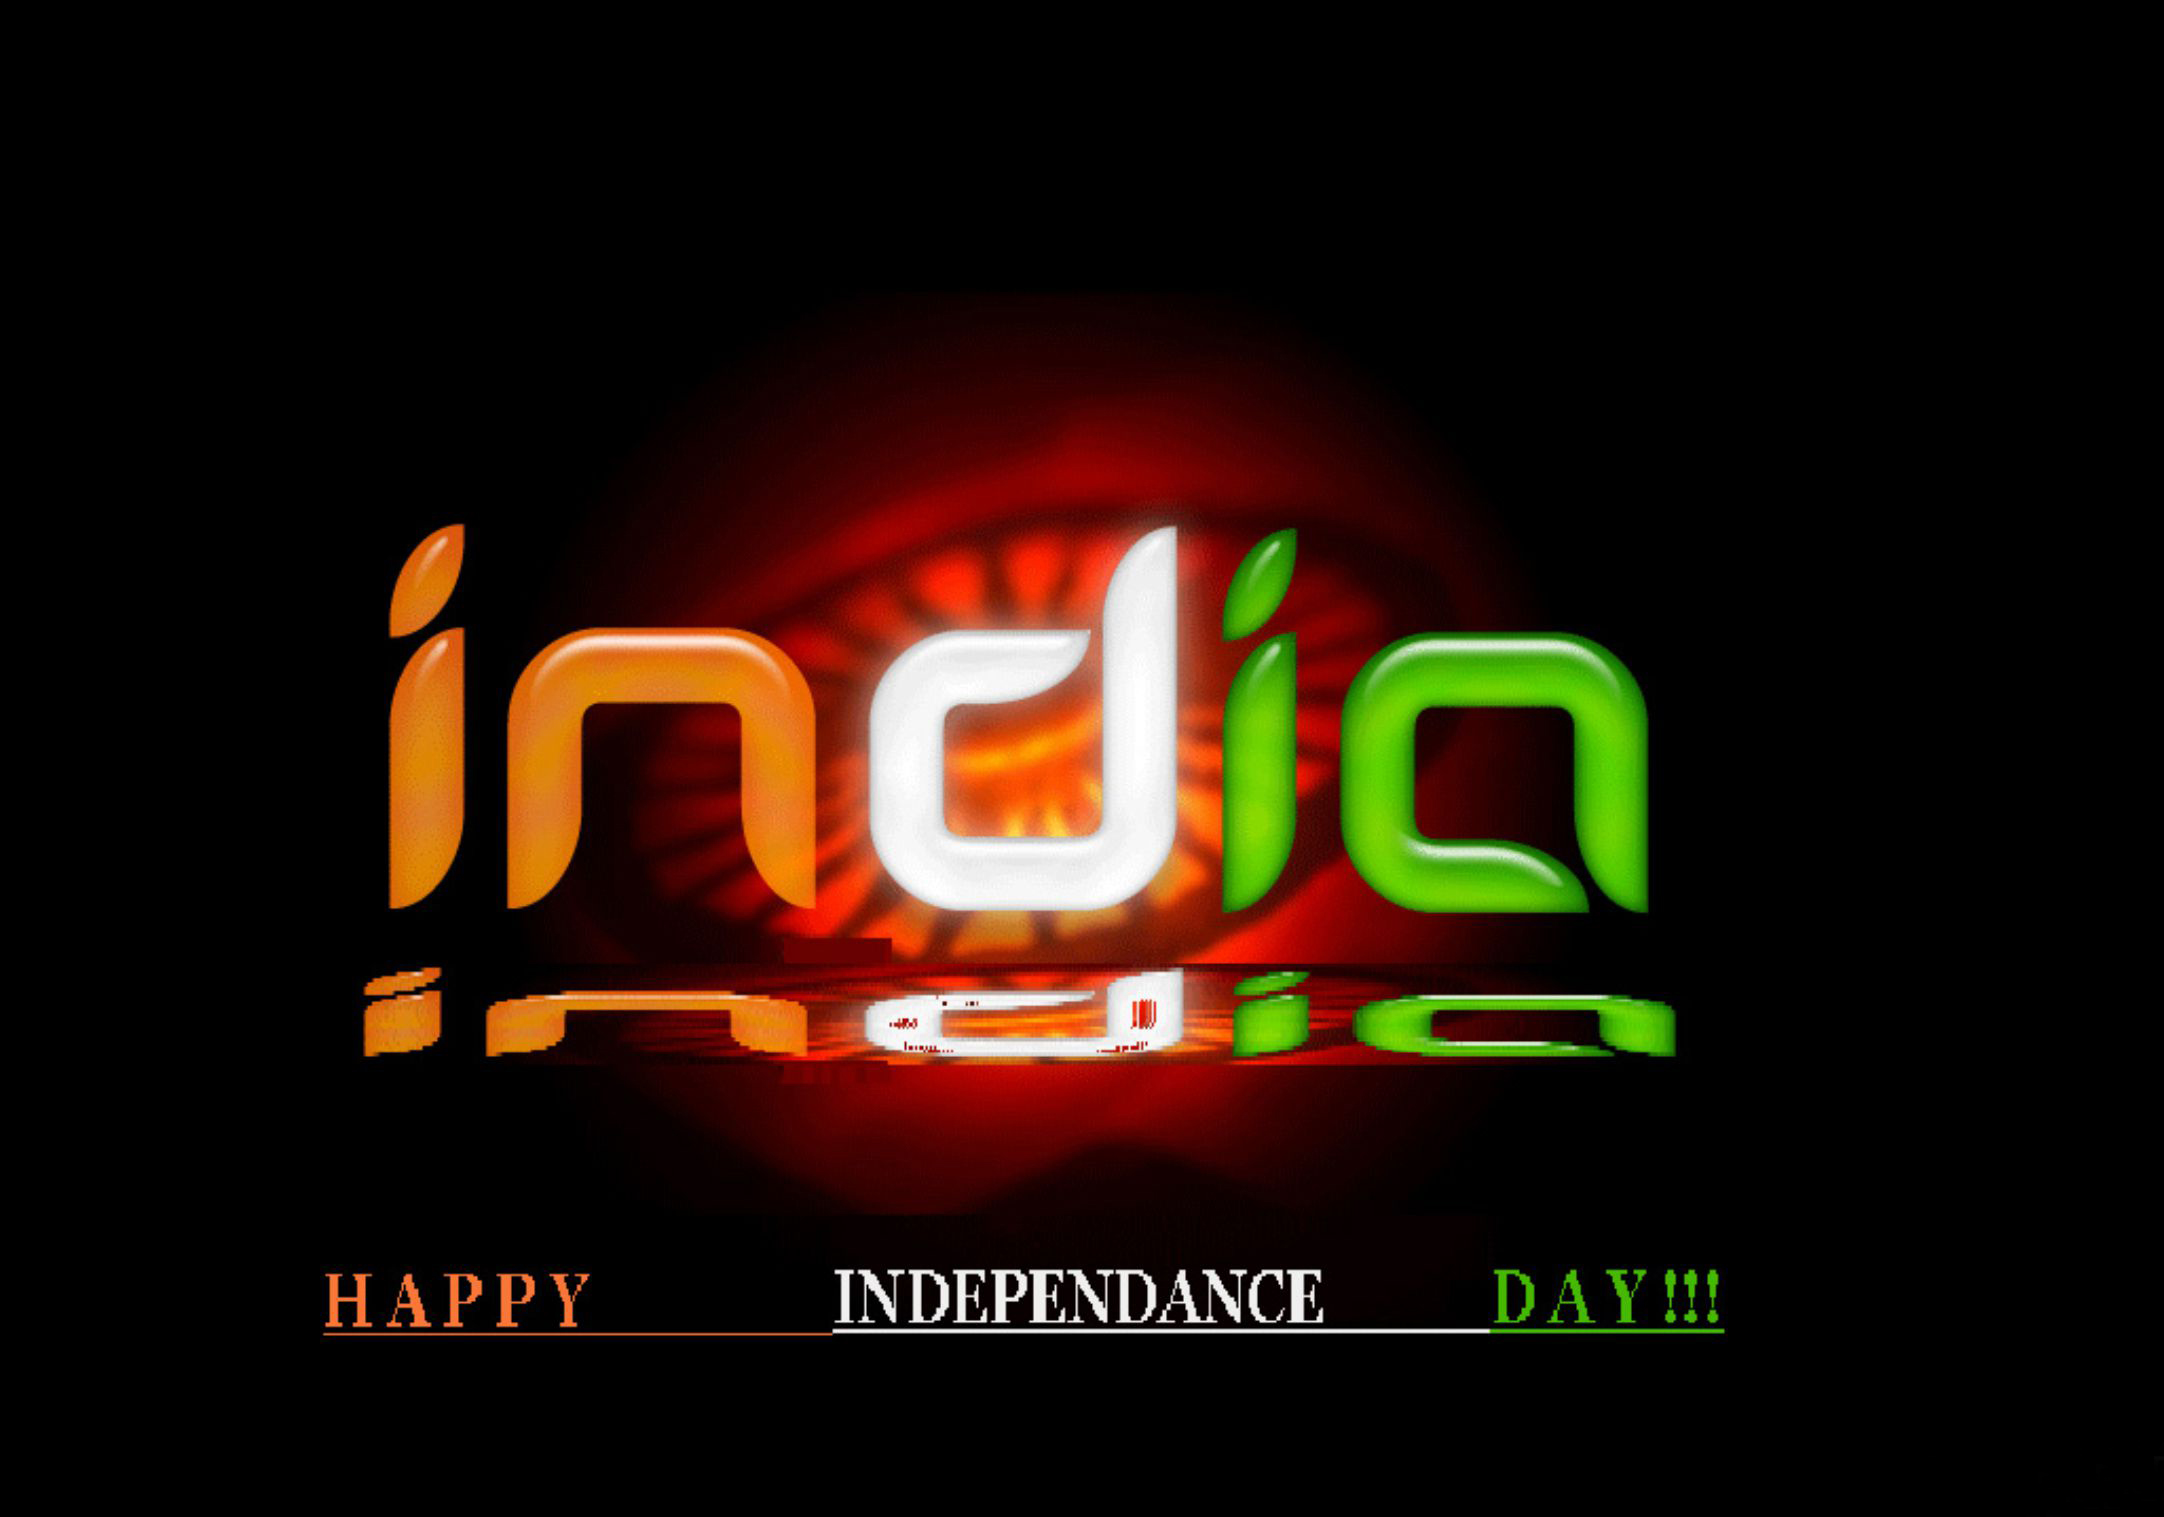 Indian National Flag High Quality Pics2013 Happy Independence Day Full